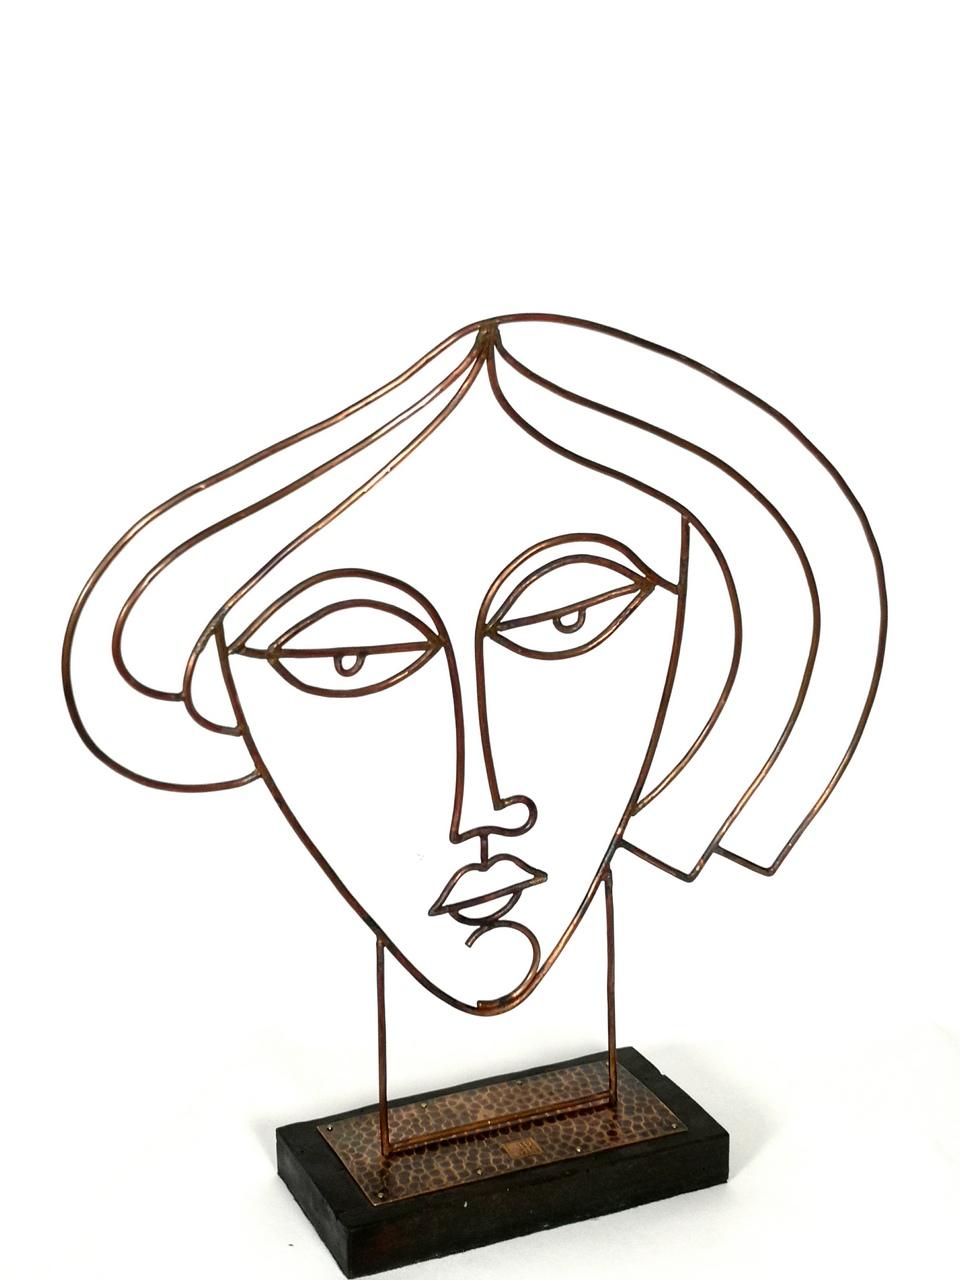 Modern Women Bust by Laszlo Pal Horvath, Copper on Wooden Base, 1970s